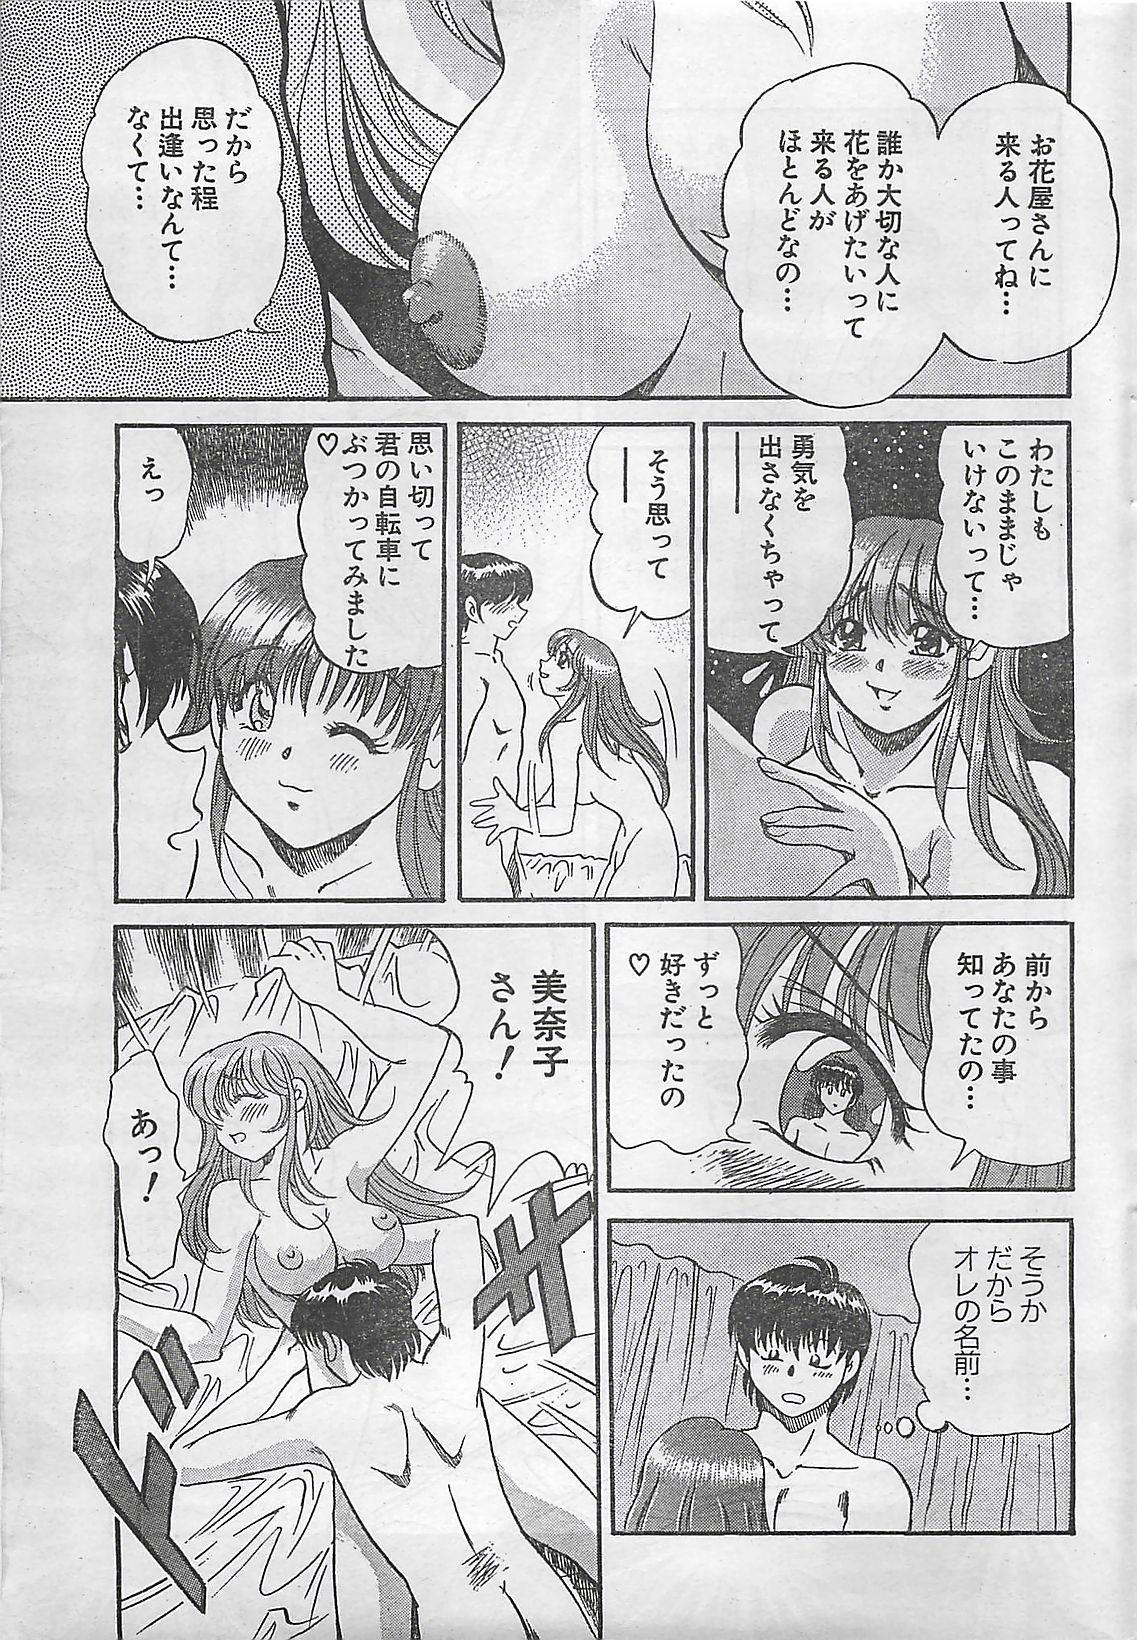 Action Pizazz 2003-09 page 37 full